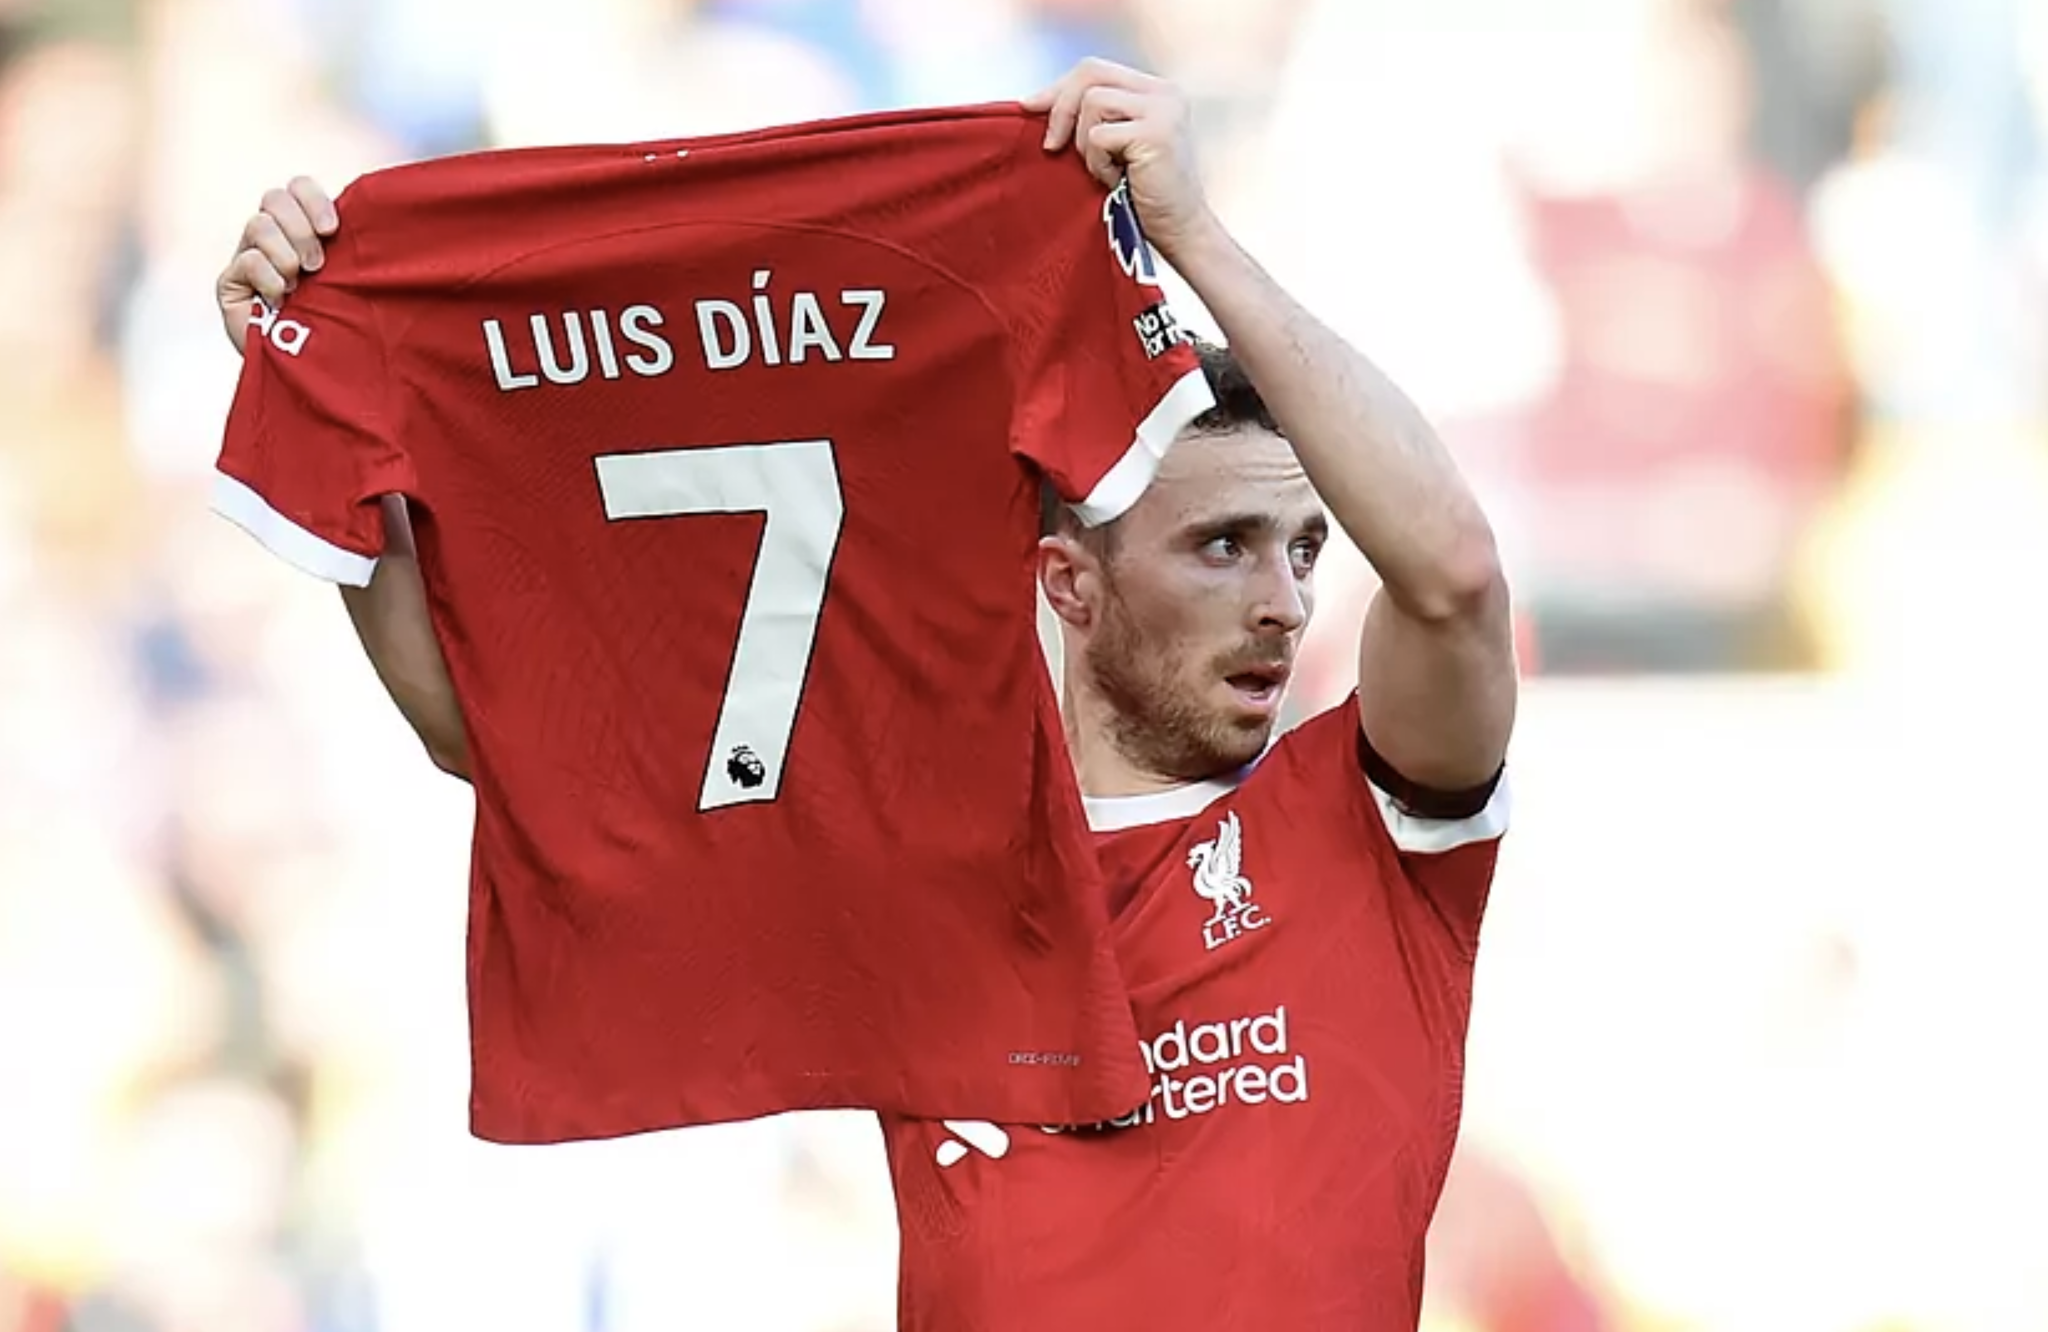 Liverpool pay tribute to Luis Diaz in big win over Forest